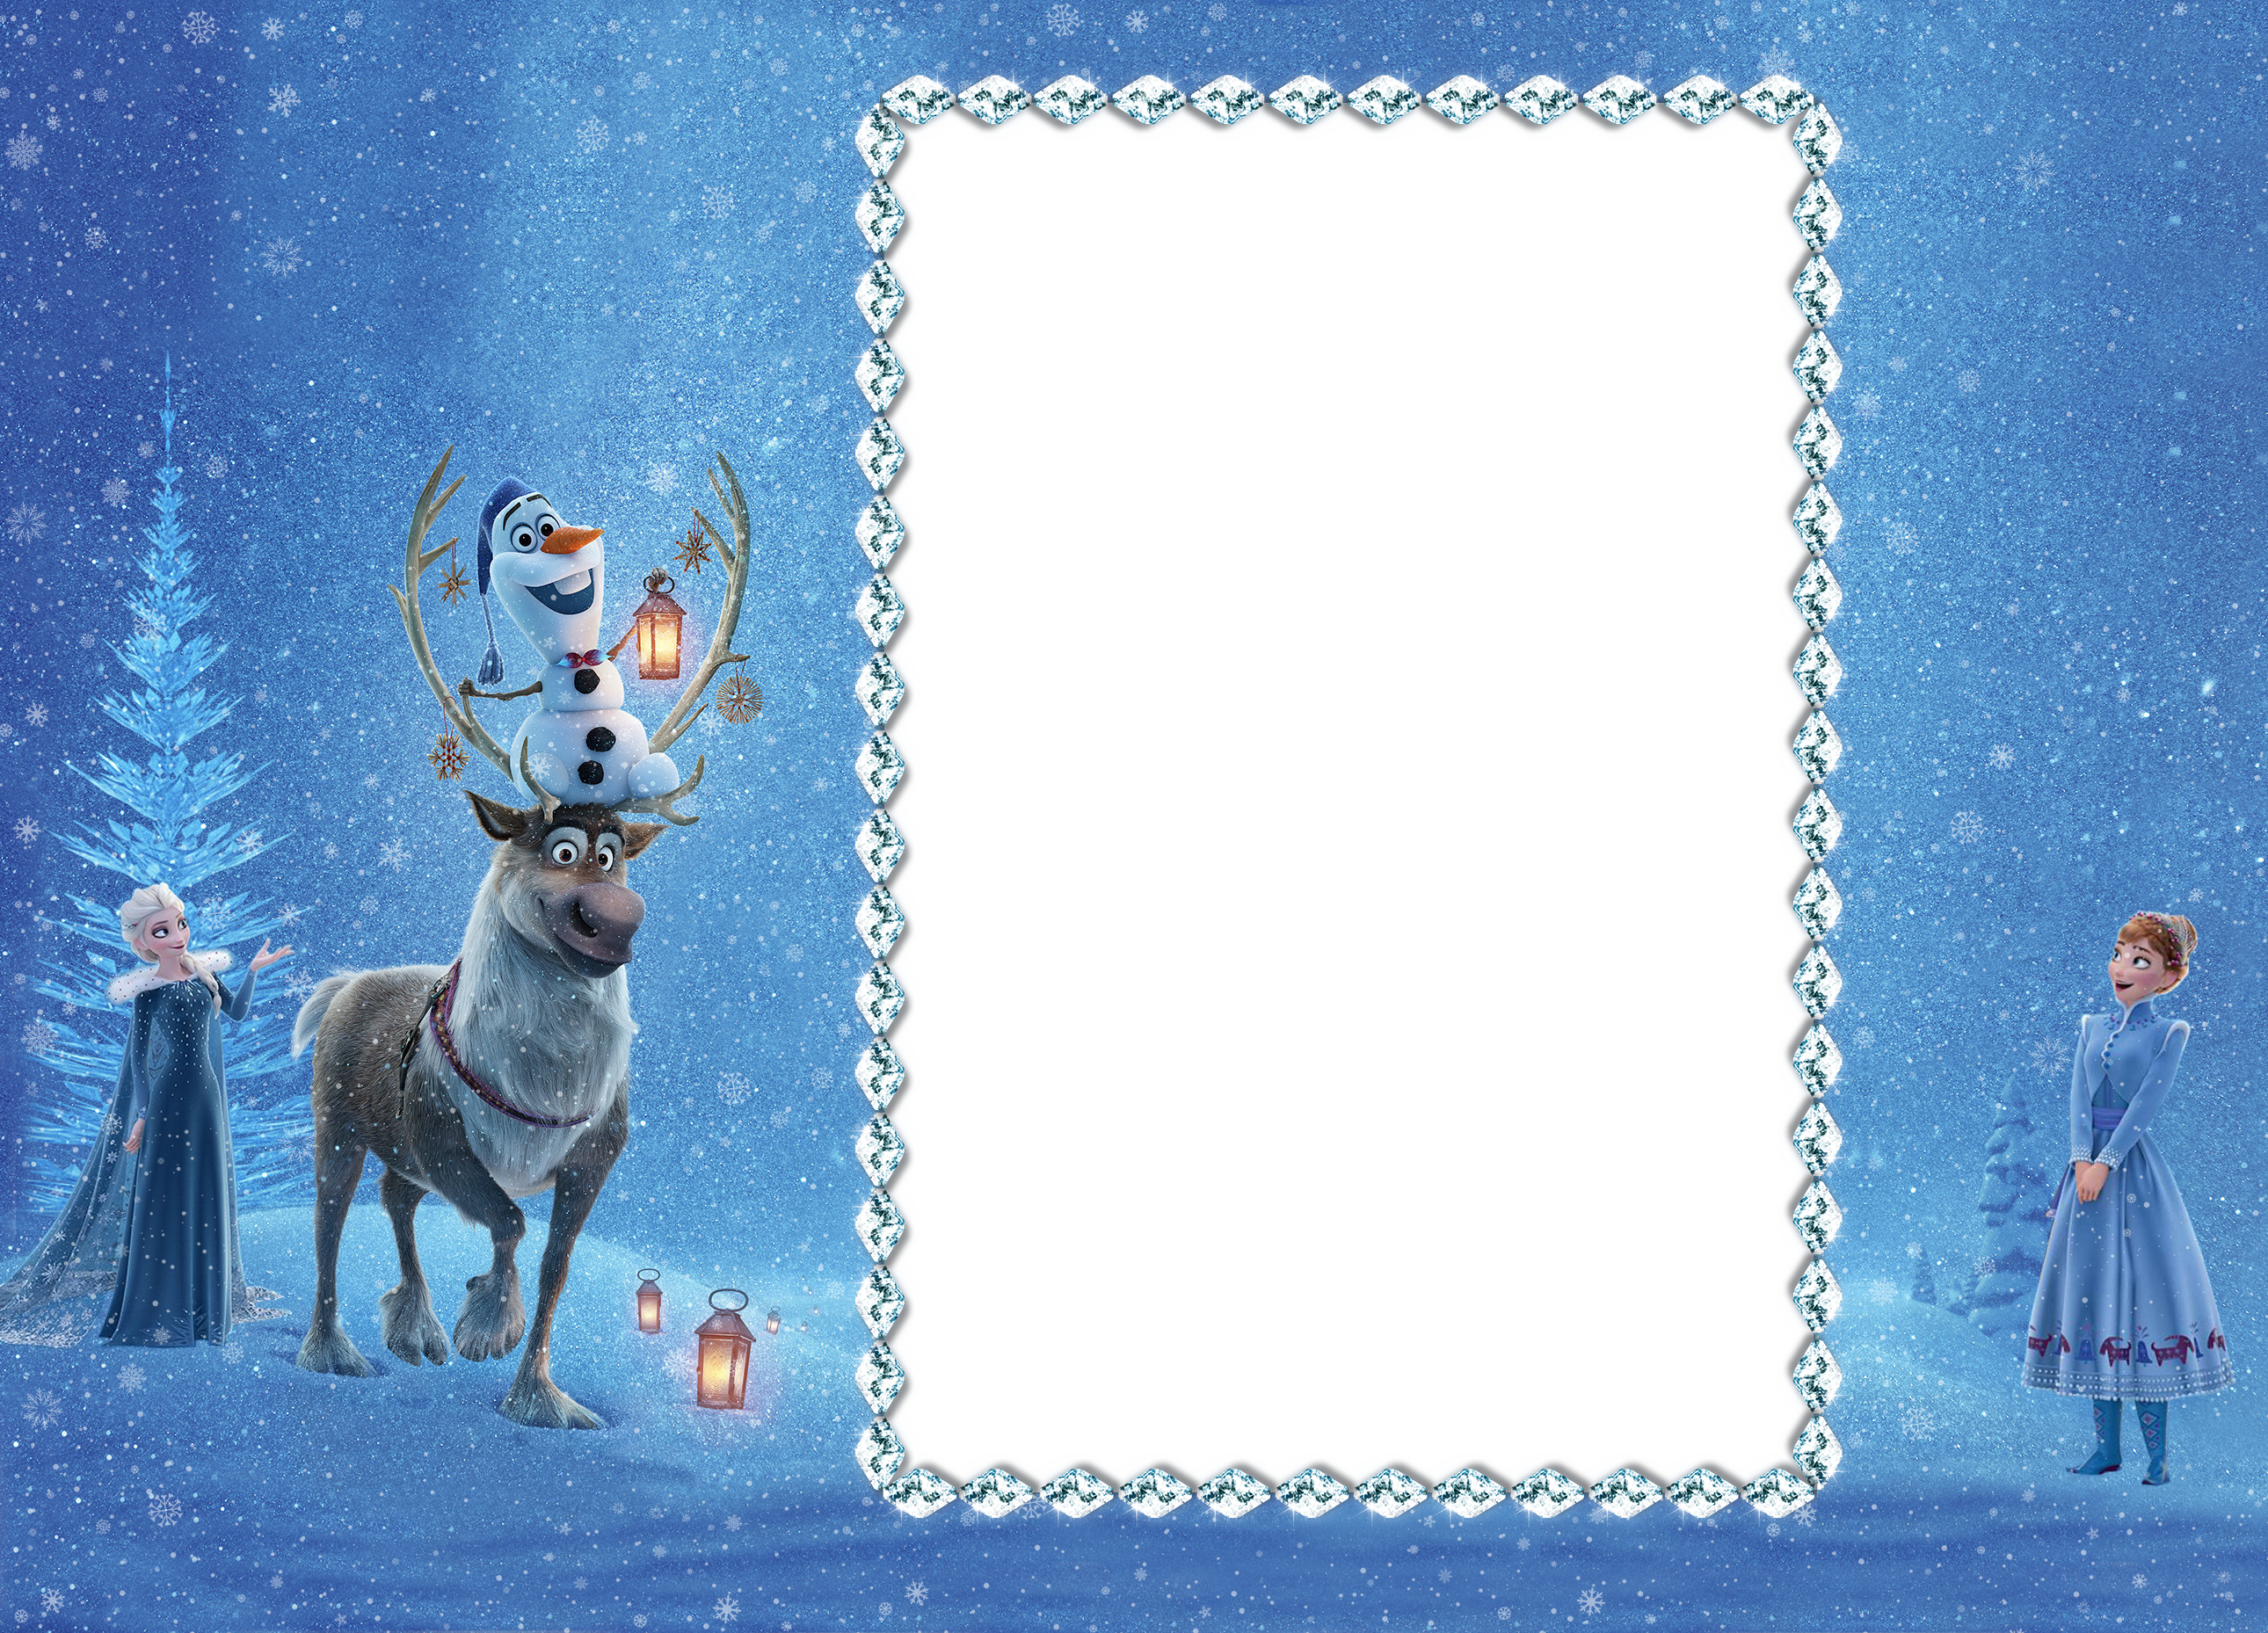 Olaf Frozen Adventure Transparent PNG Frame Quality Image And Transparent PNG Free Clipart